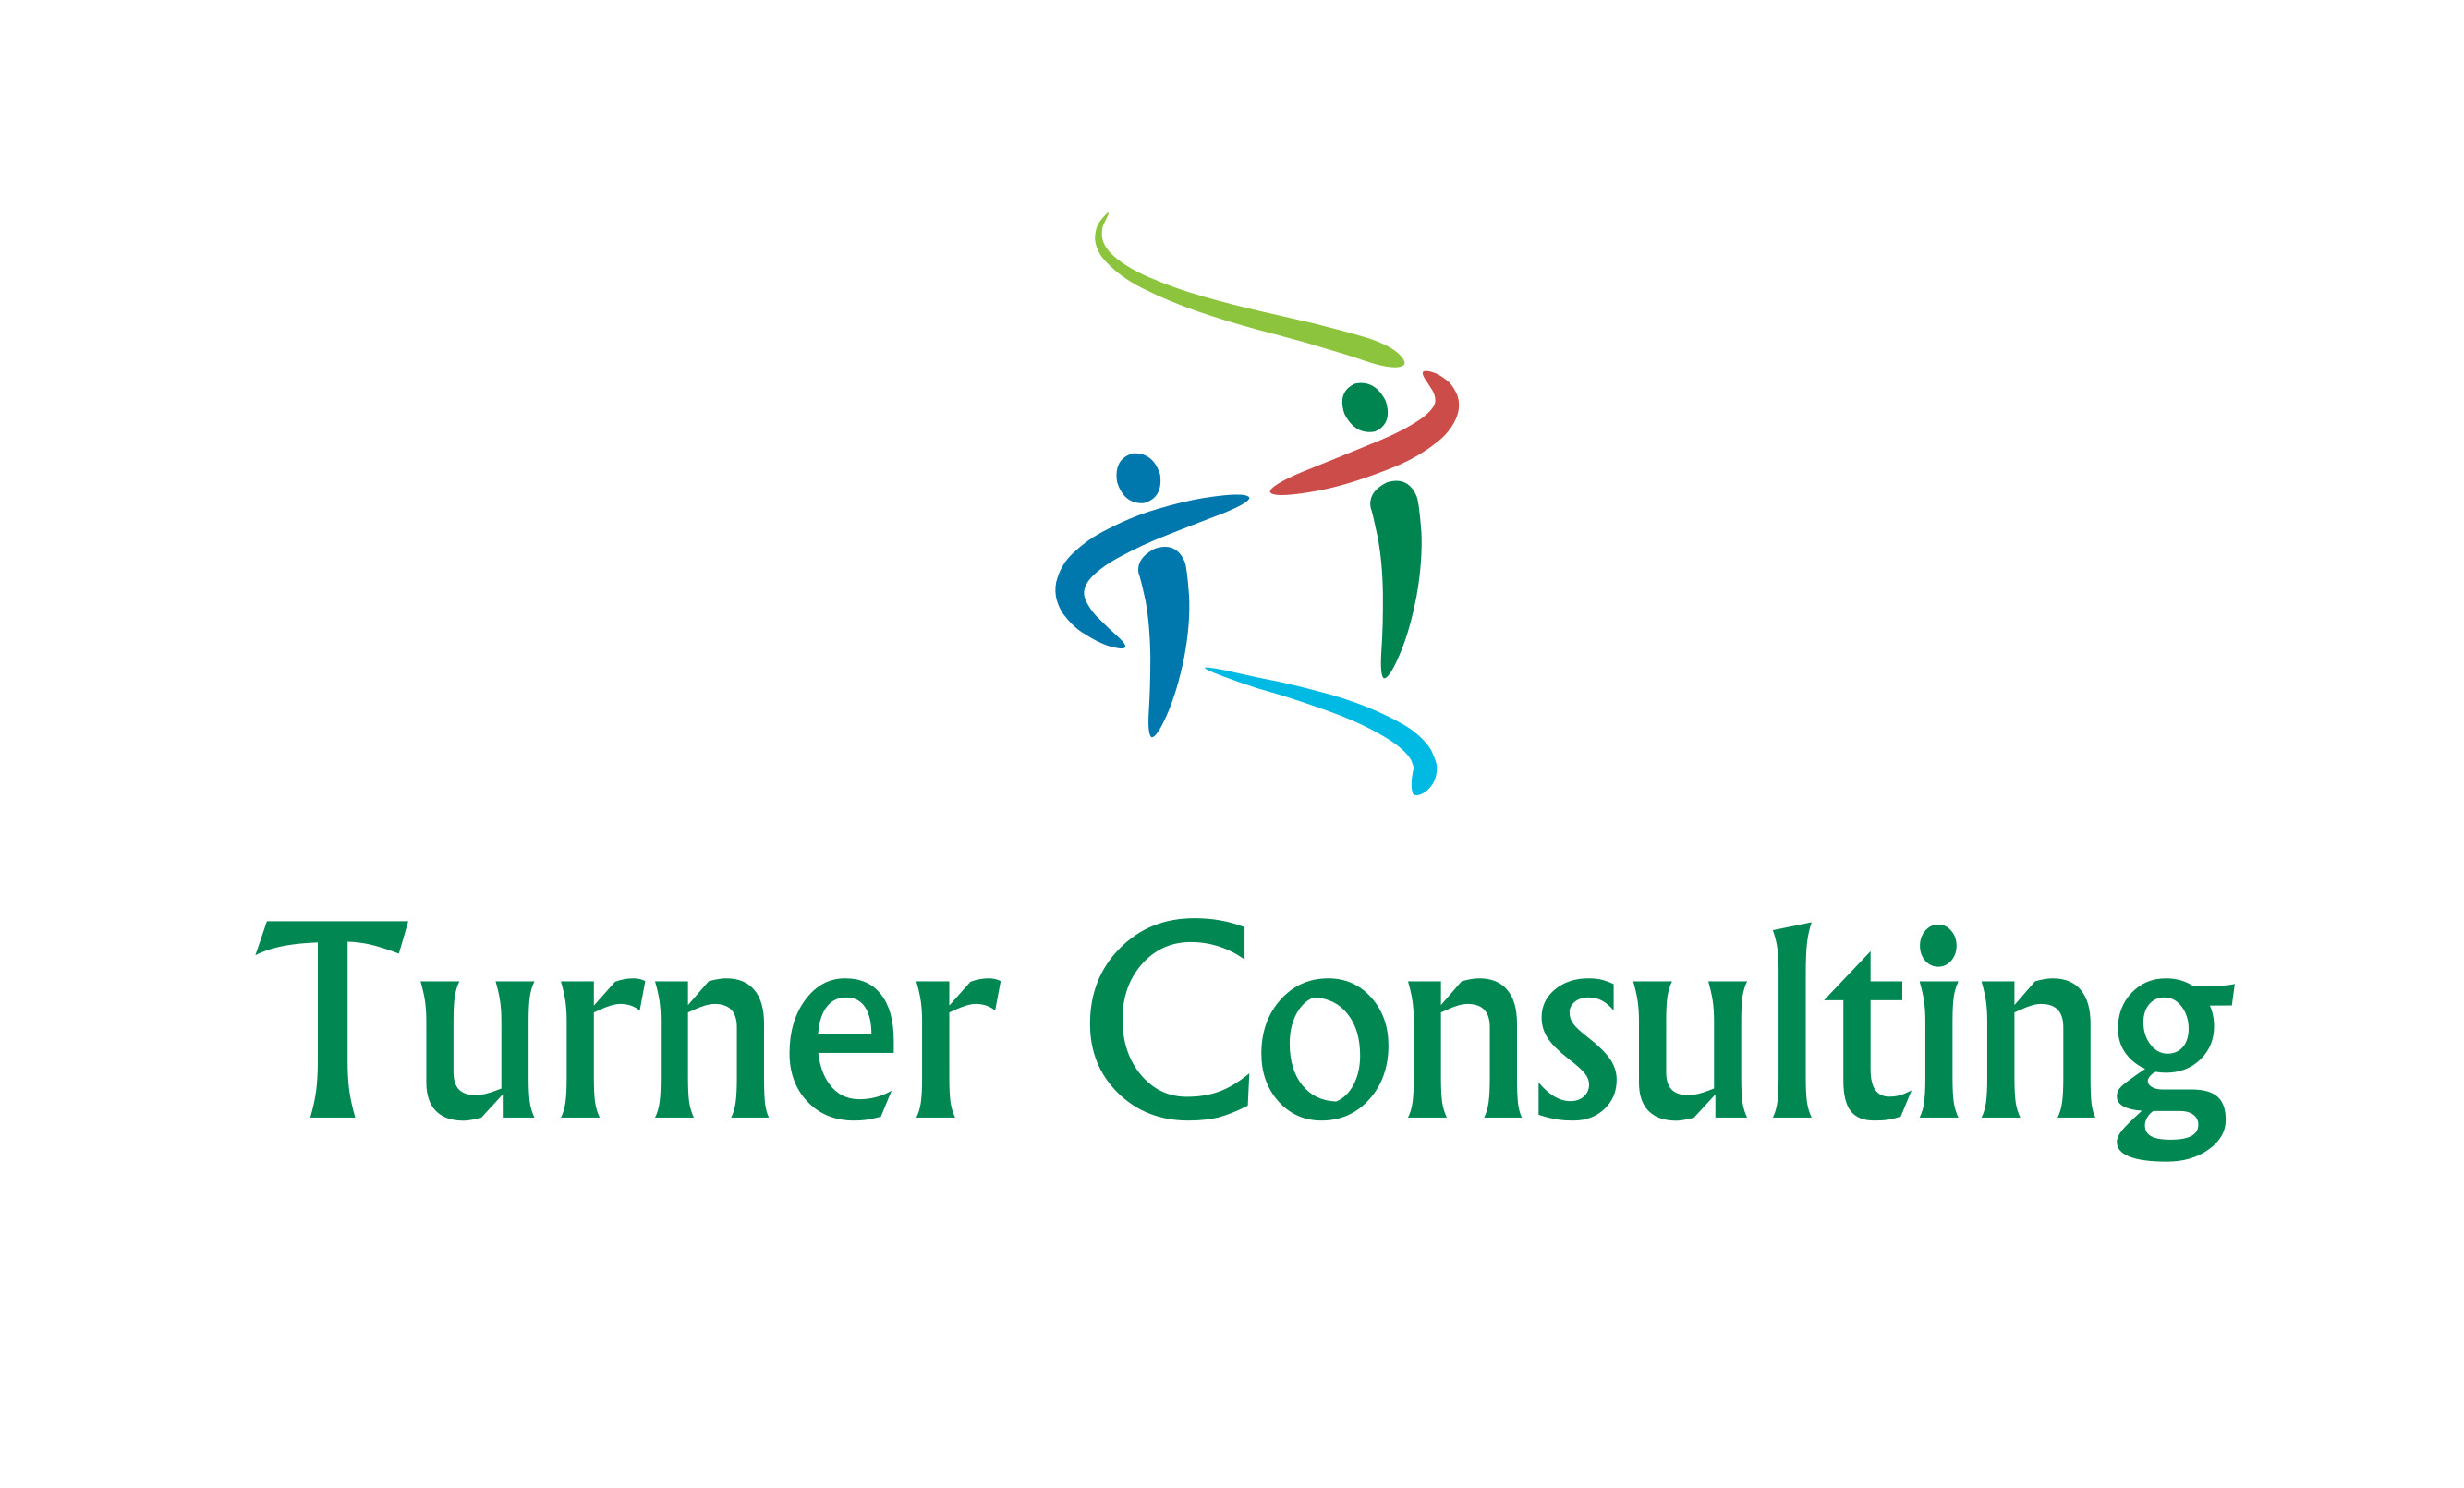 Turner Consulting